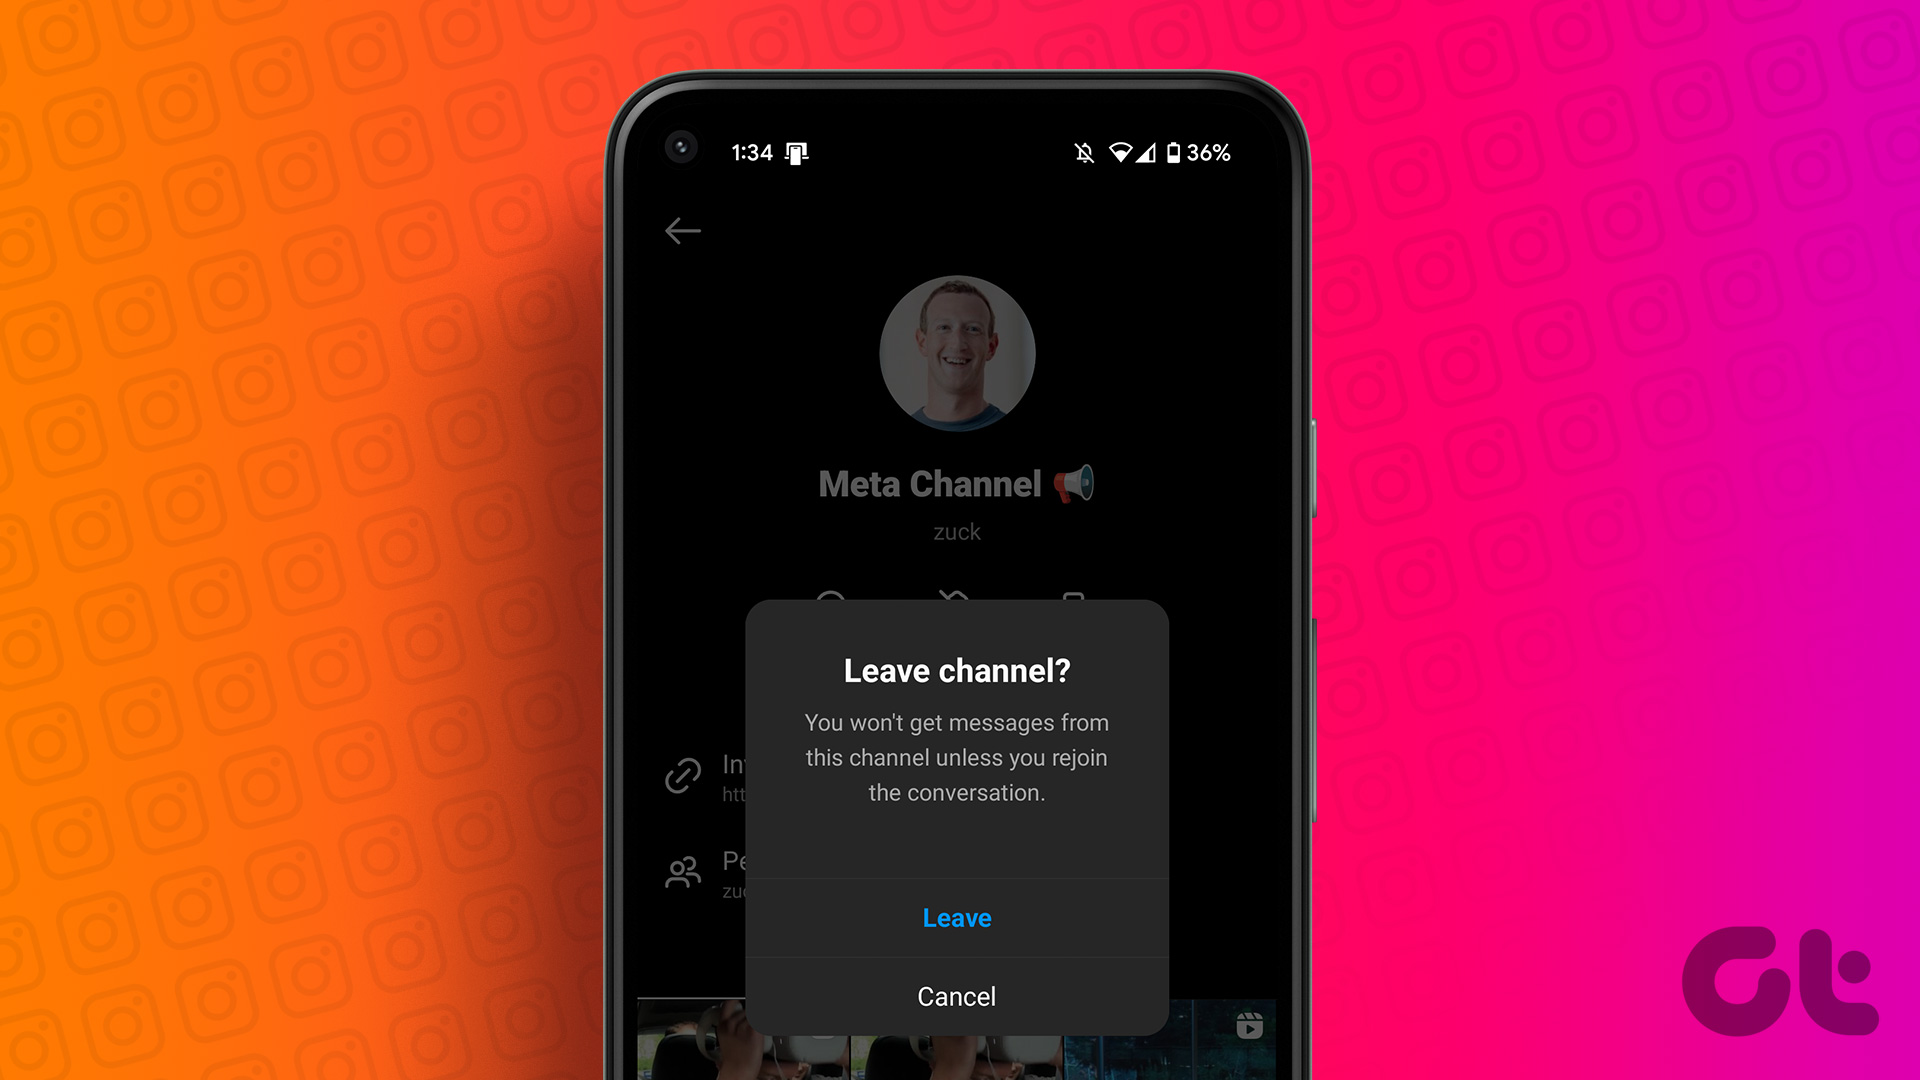 How to Leave Instagram Broadcast Channel or Turn off Notifications